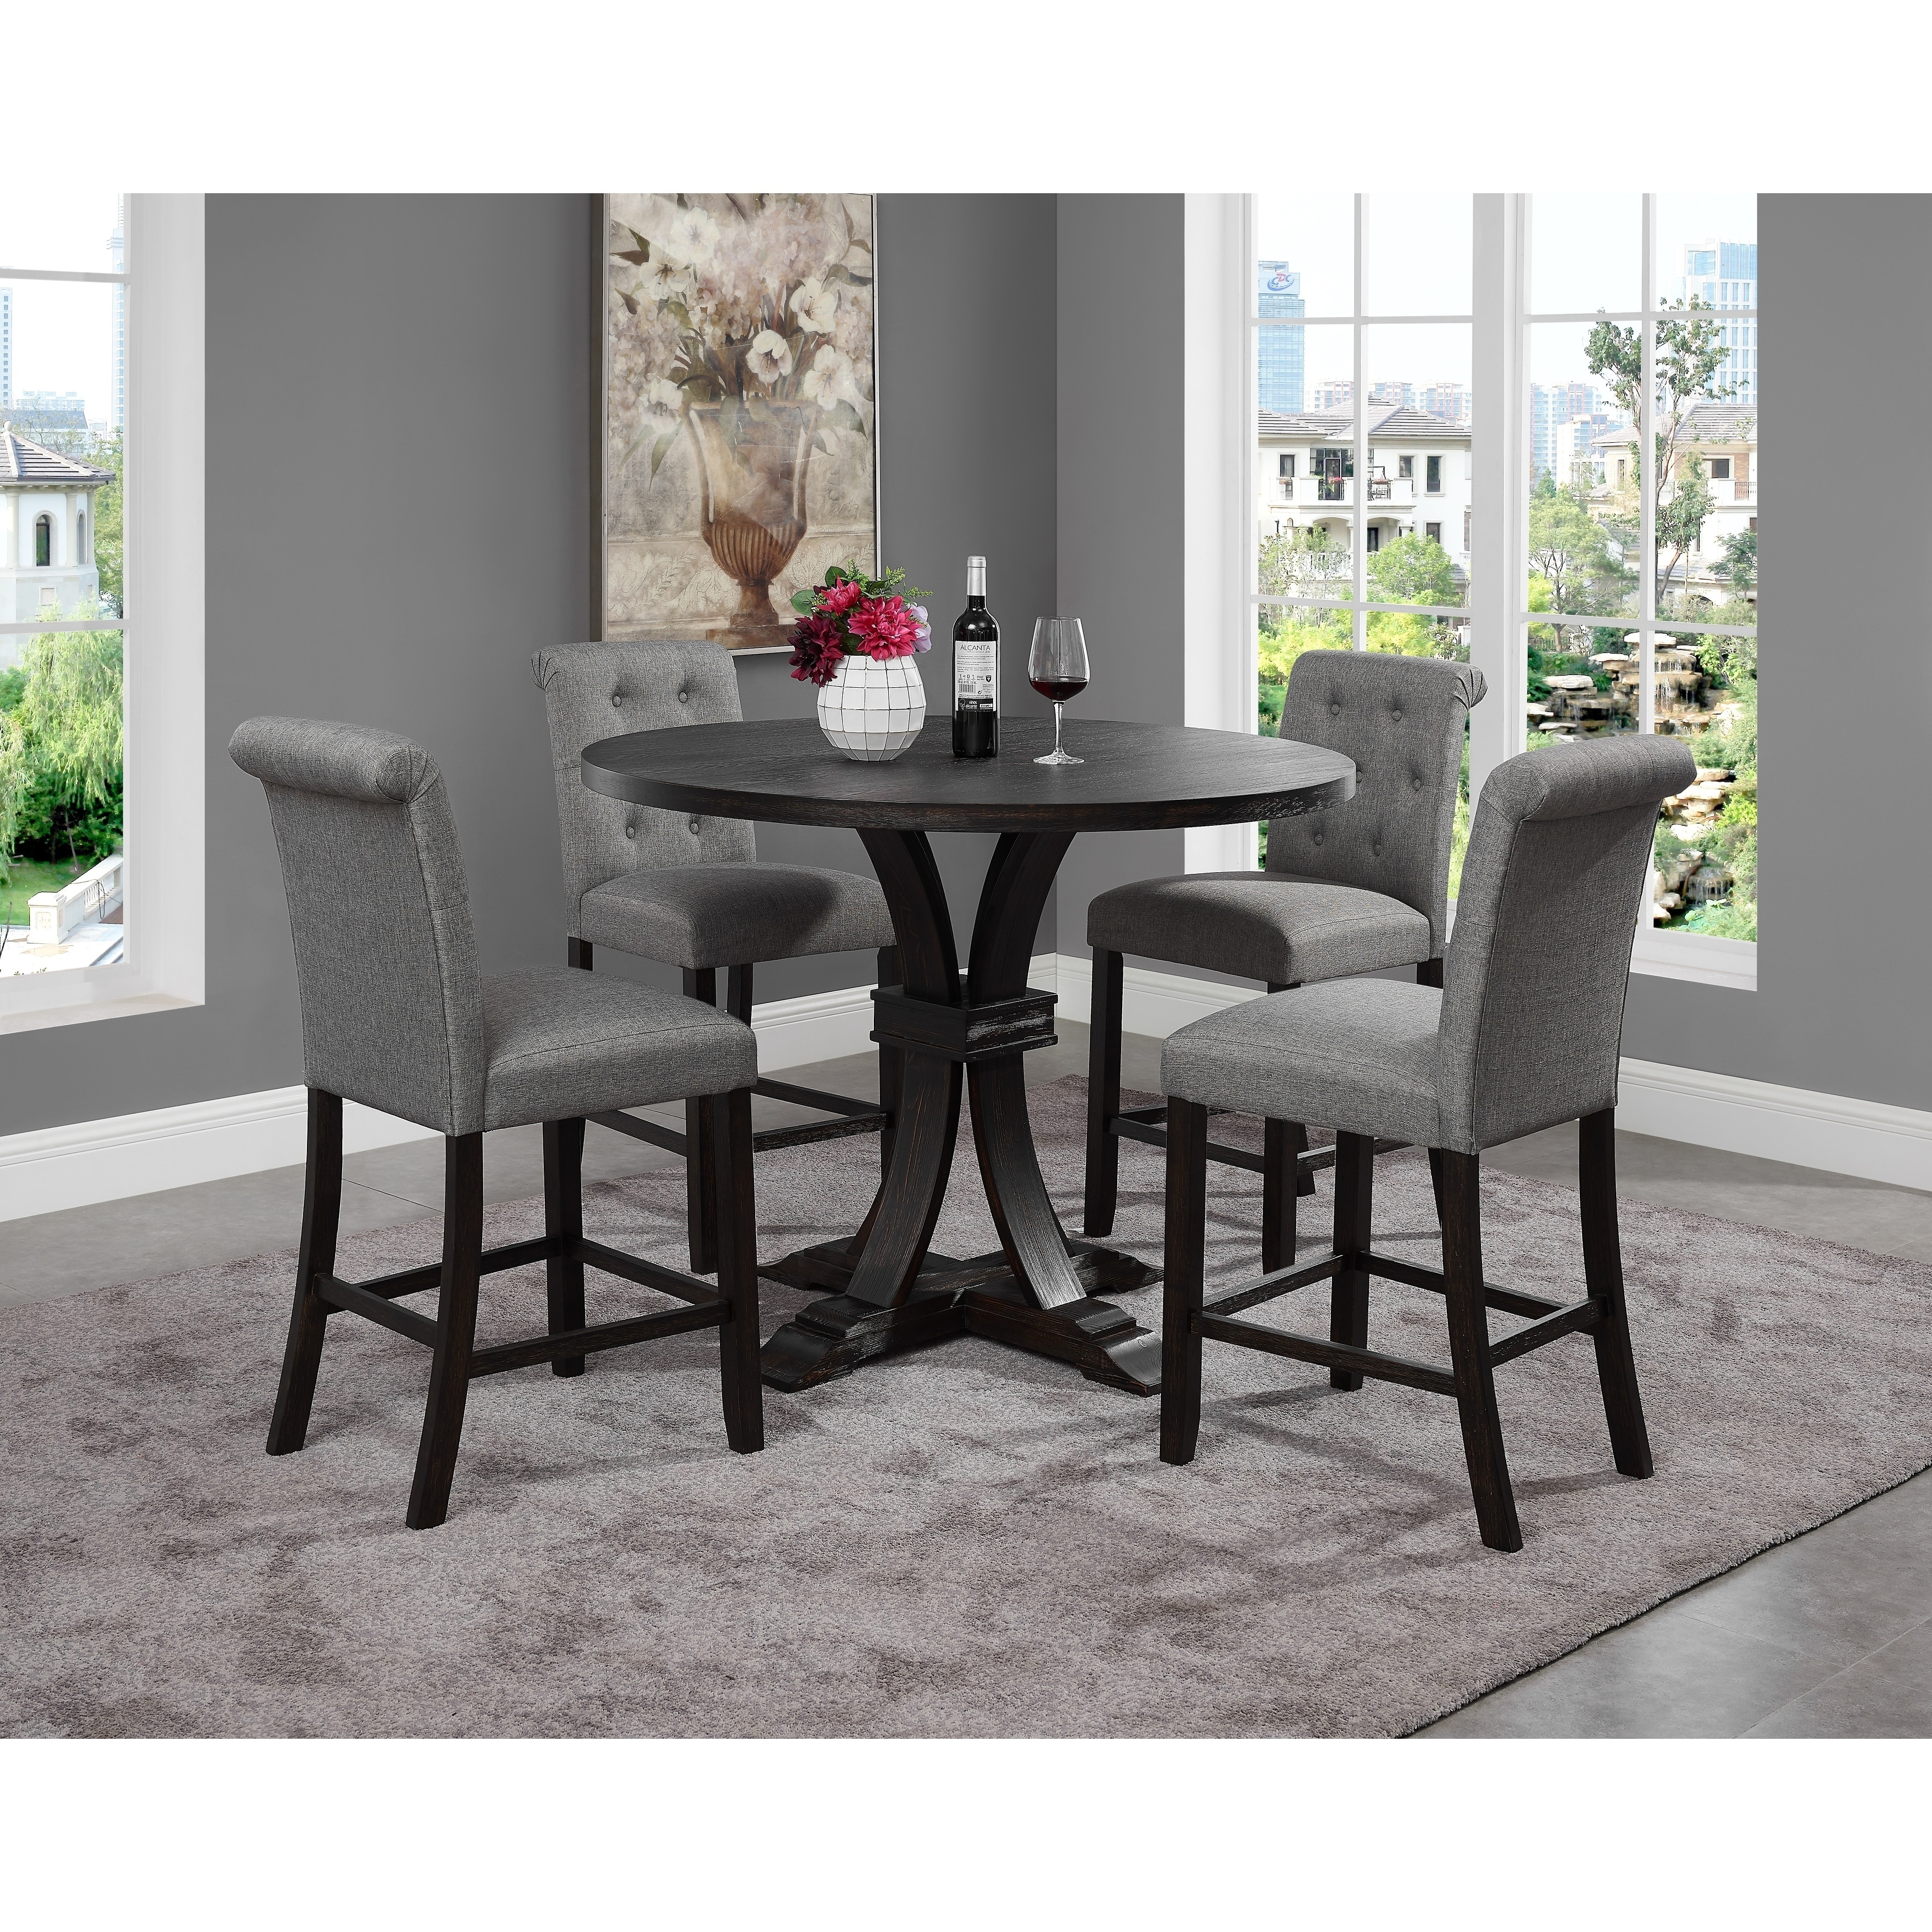 Pub Height Kitchen Table And Chairs / Amazon Com O K Furniture 5 Piece